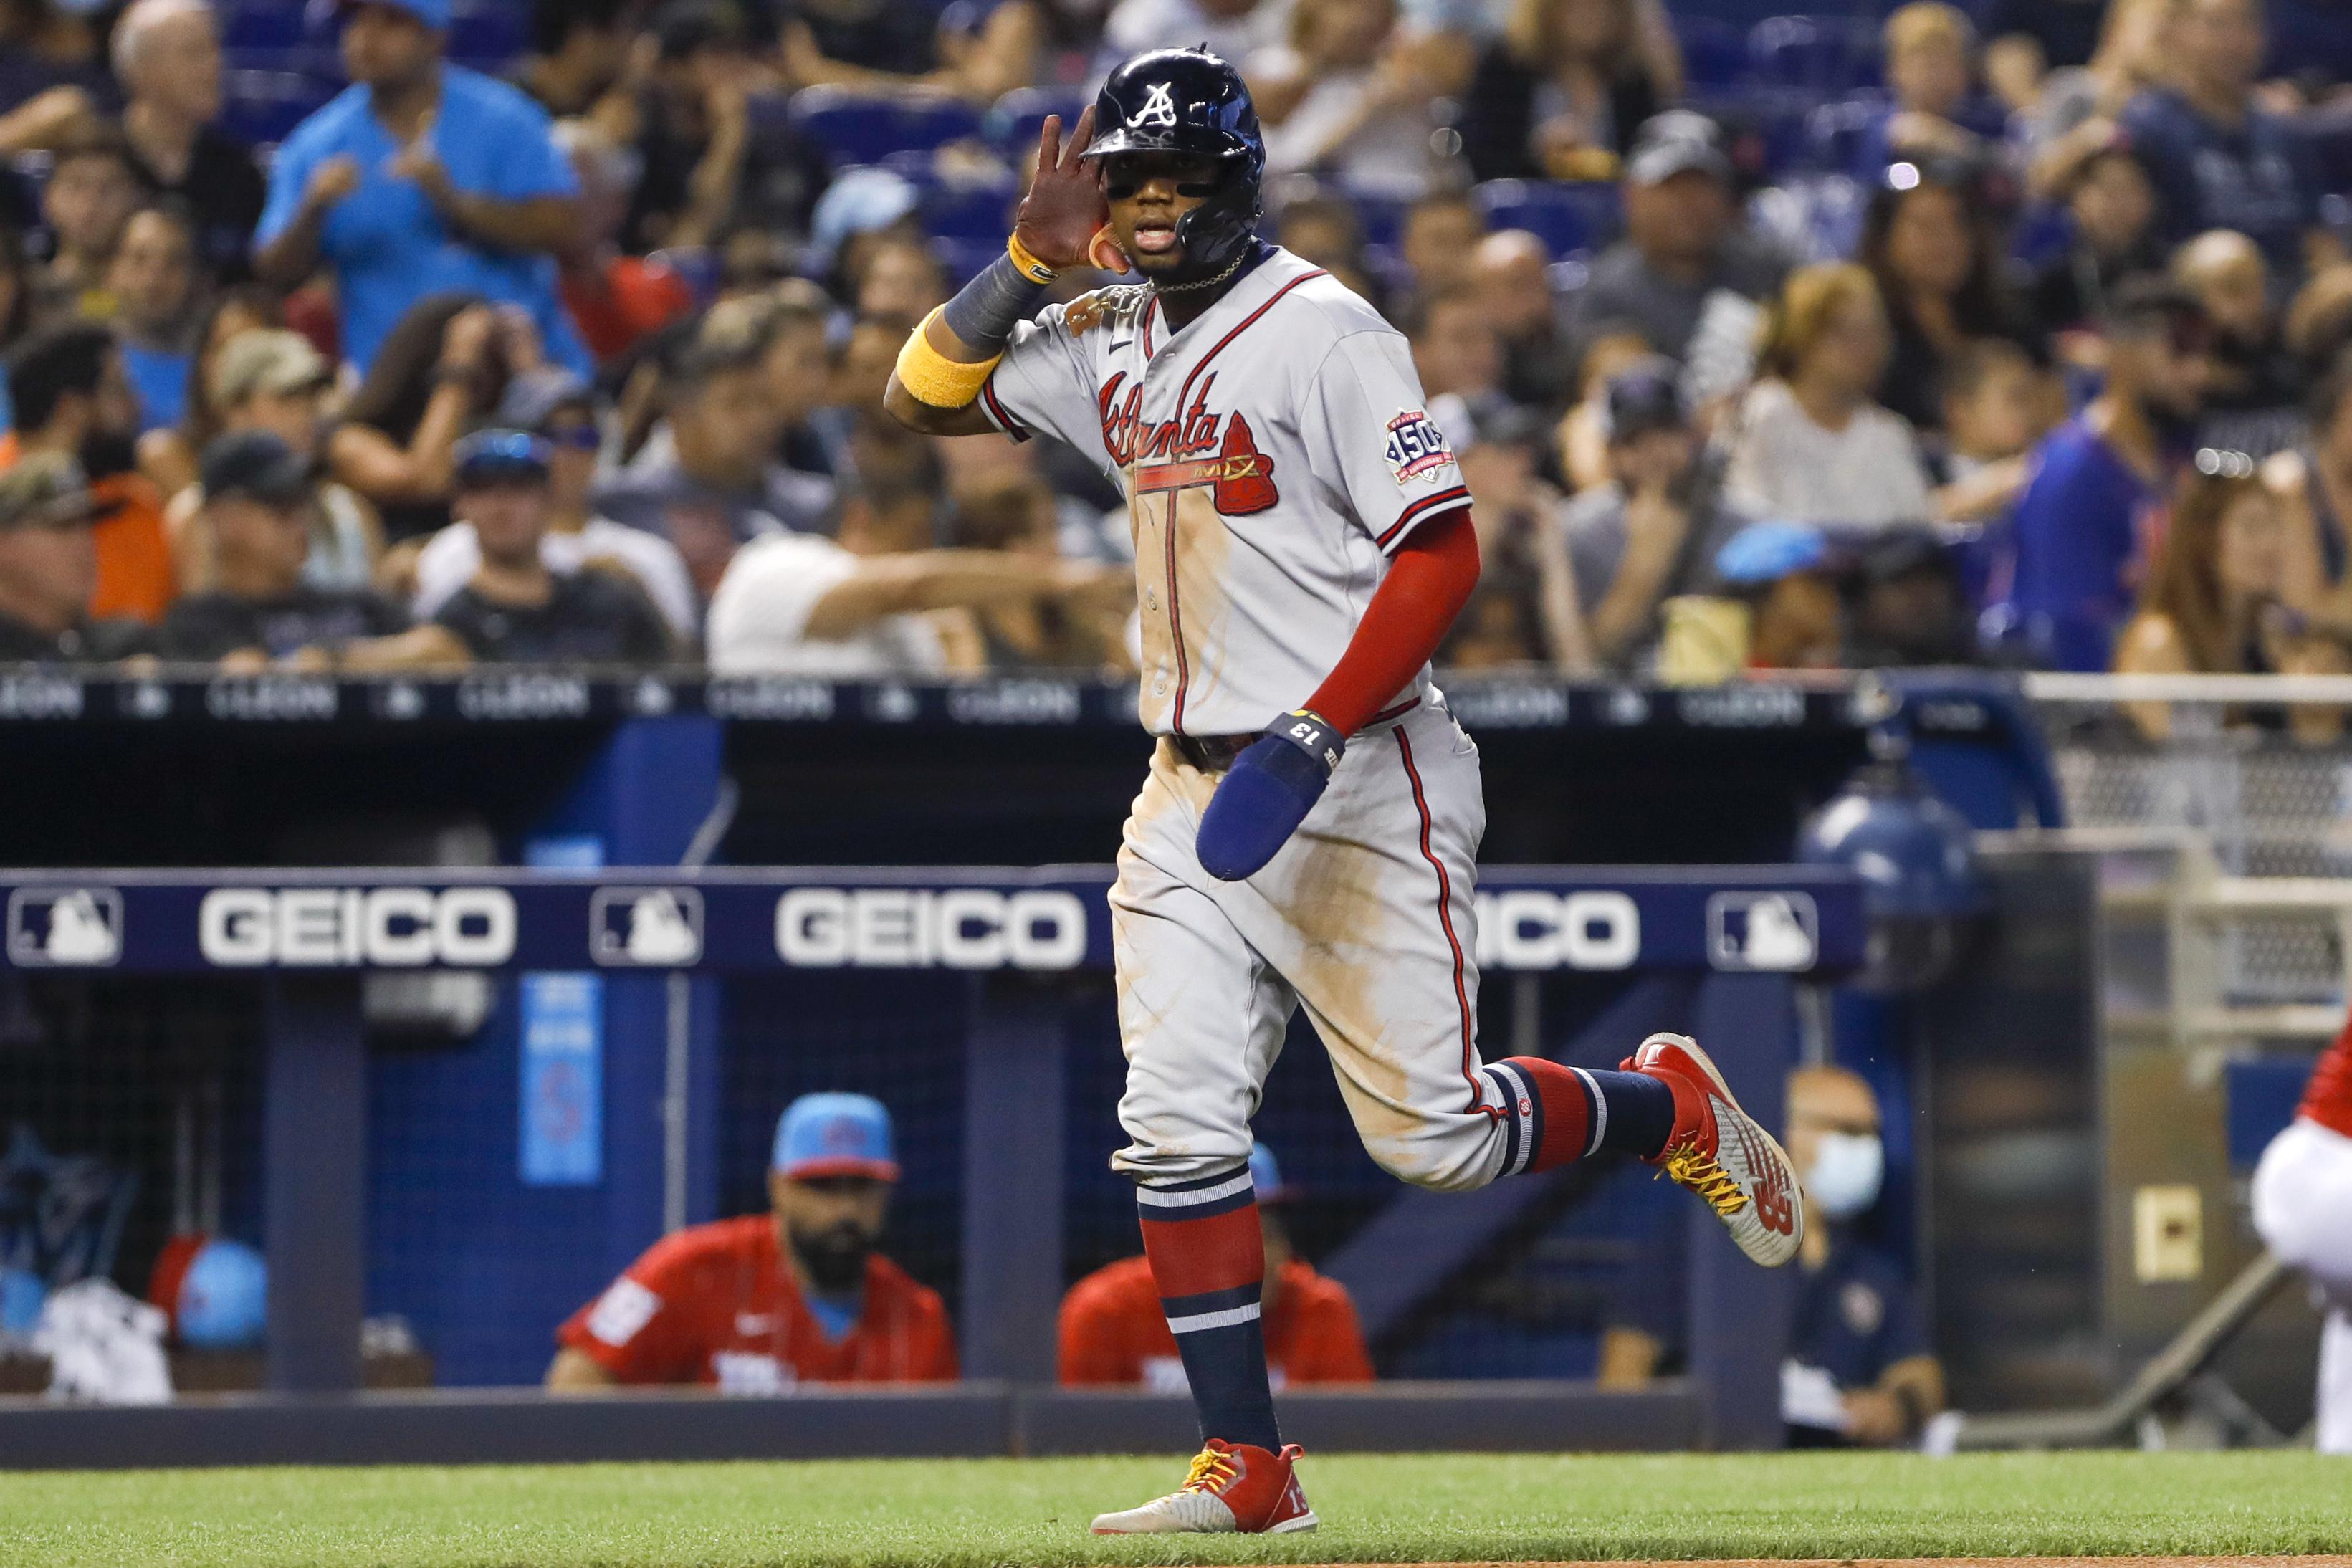 Ronald Acuna Jr. Proves Once Again Why He's One of the Most Likable Players in Baseball